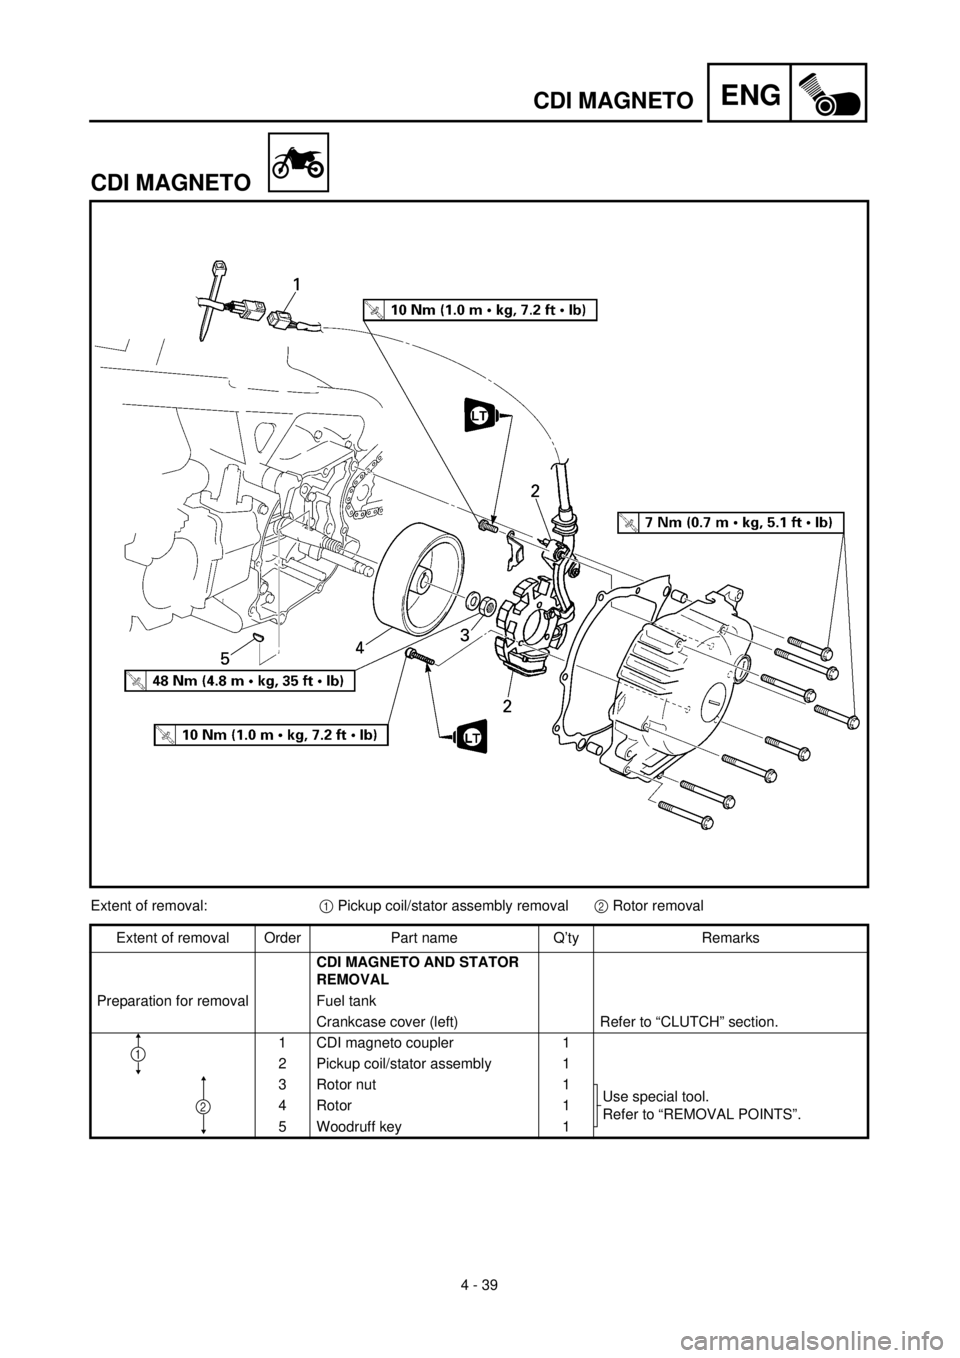 YAMAHA TTR90 2002  Owners Manual 4 - 39
ENGCDI MAGNETO
CDI MAGNETO
Extent of removal:1 Pickup coil/stator assembly removal2 Rotor removal
Extent of removal Order Part name Q’ty Remarks
CDI MAGNETO AND STATOR 
REMOVAL 
Preparation f